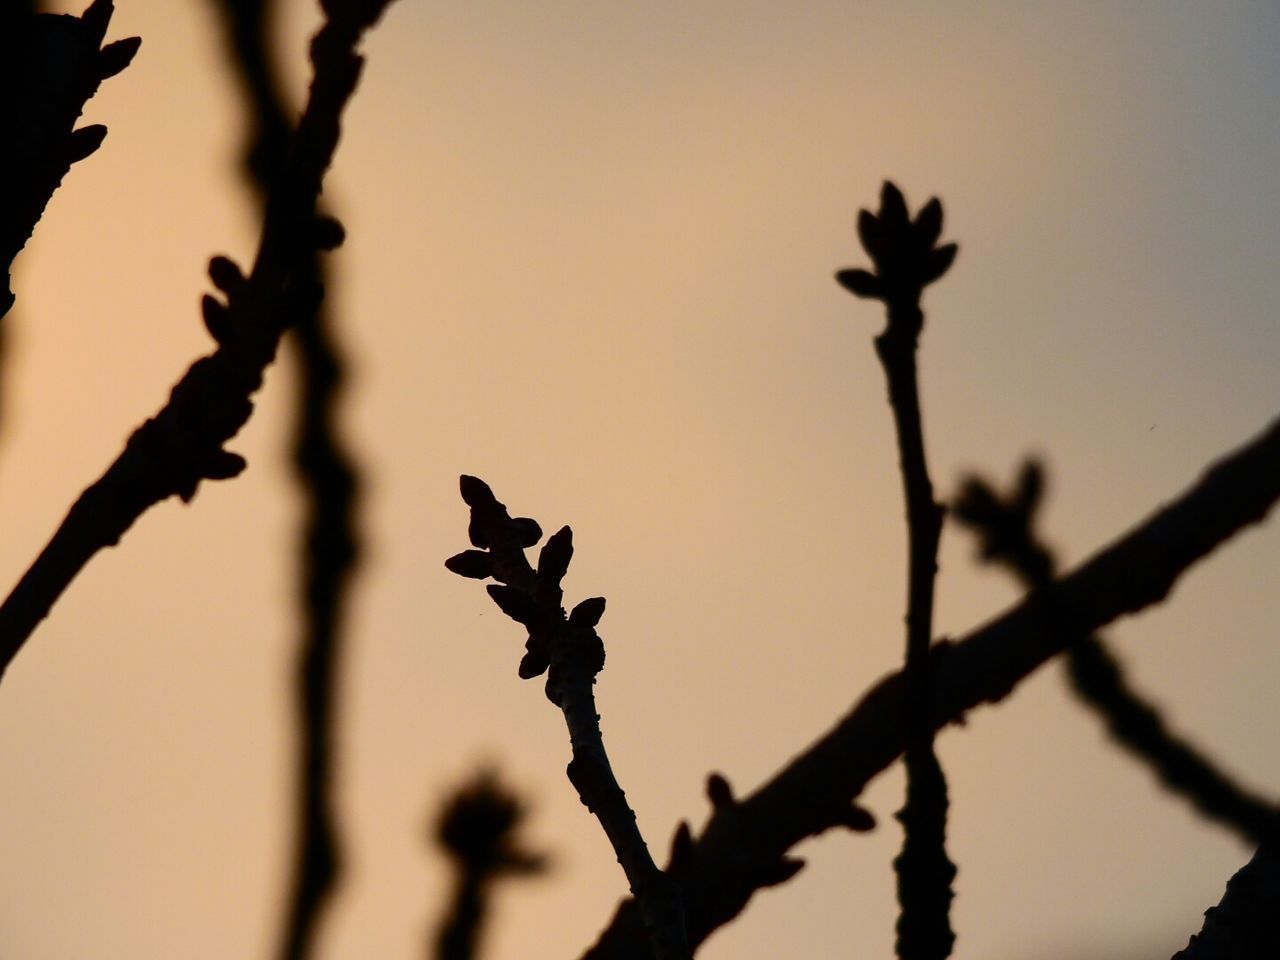 CLOSE-UP OF SILHOUETTE PLANT AGAINST SKY